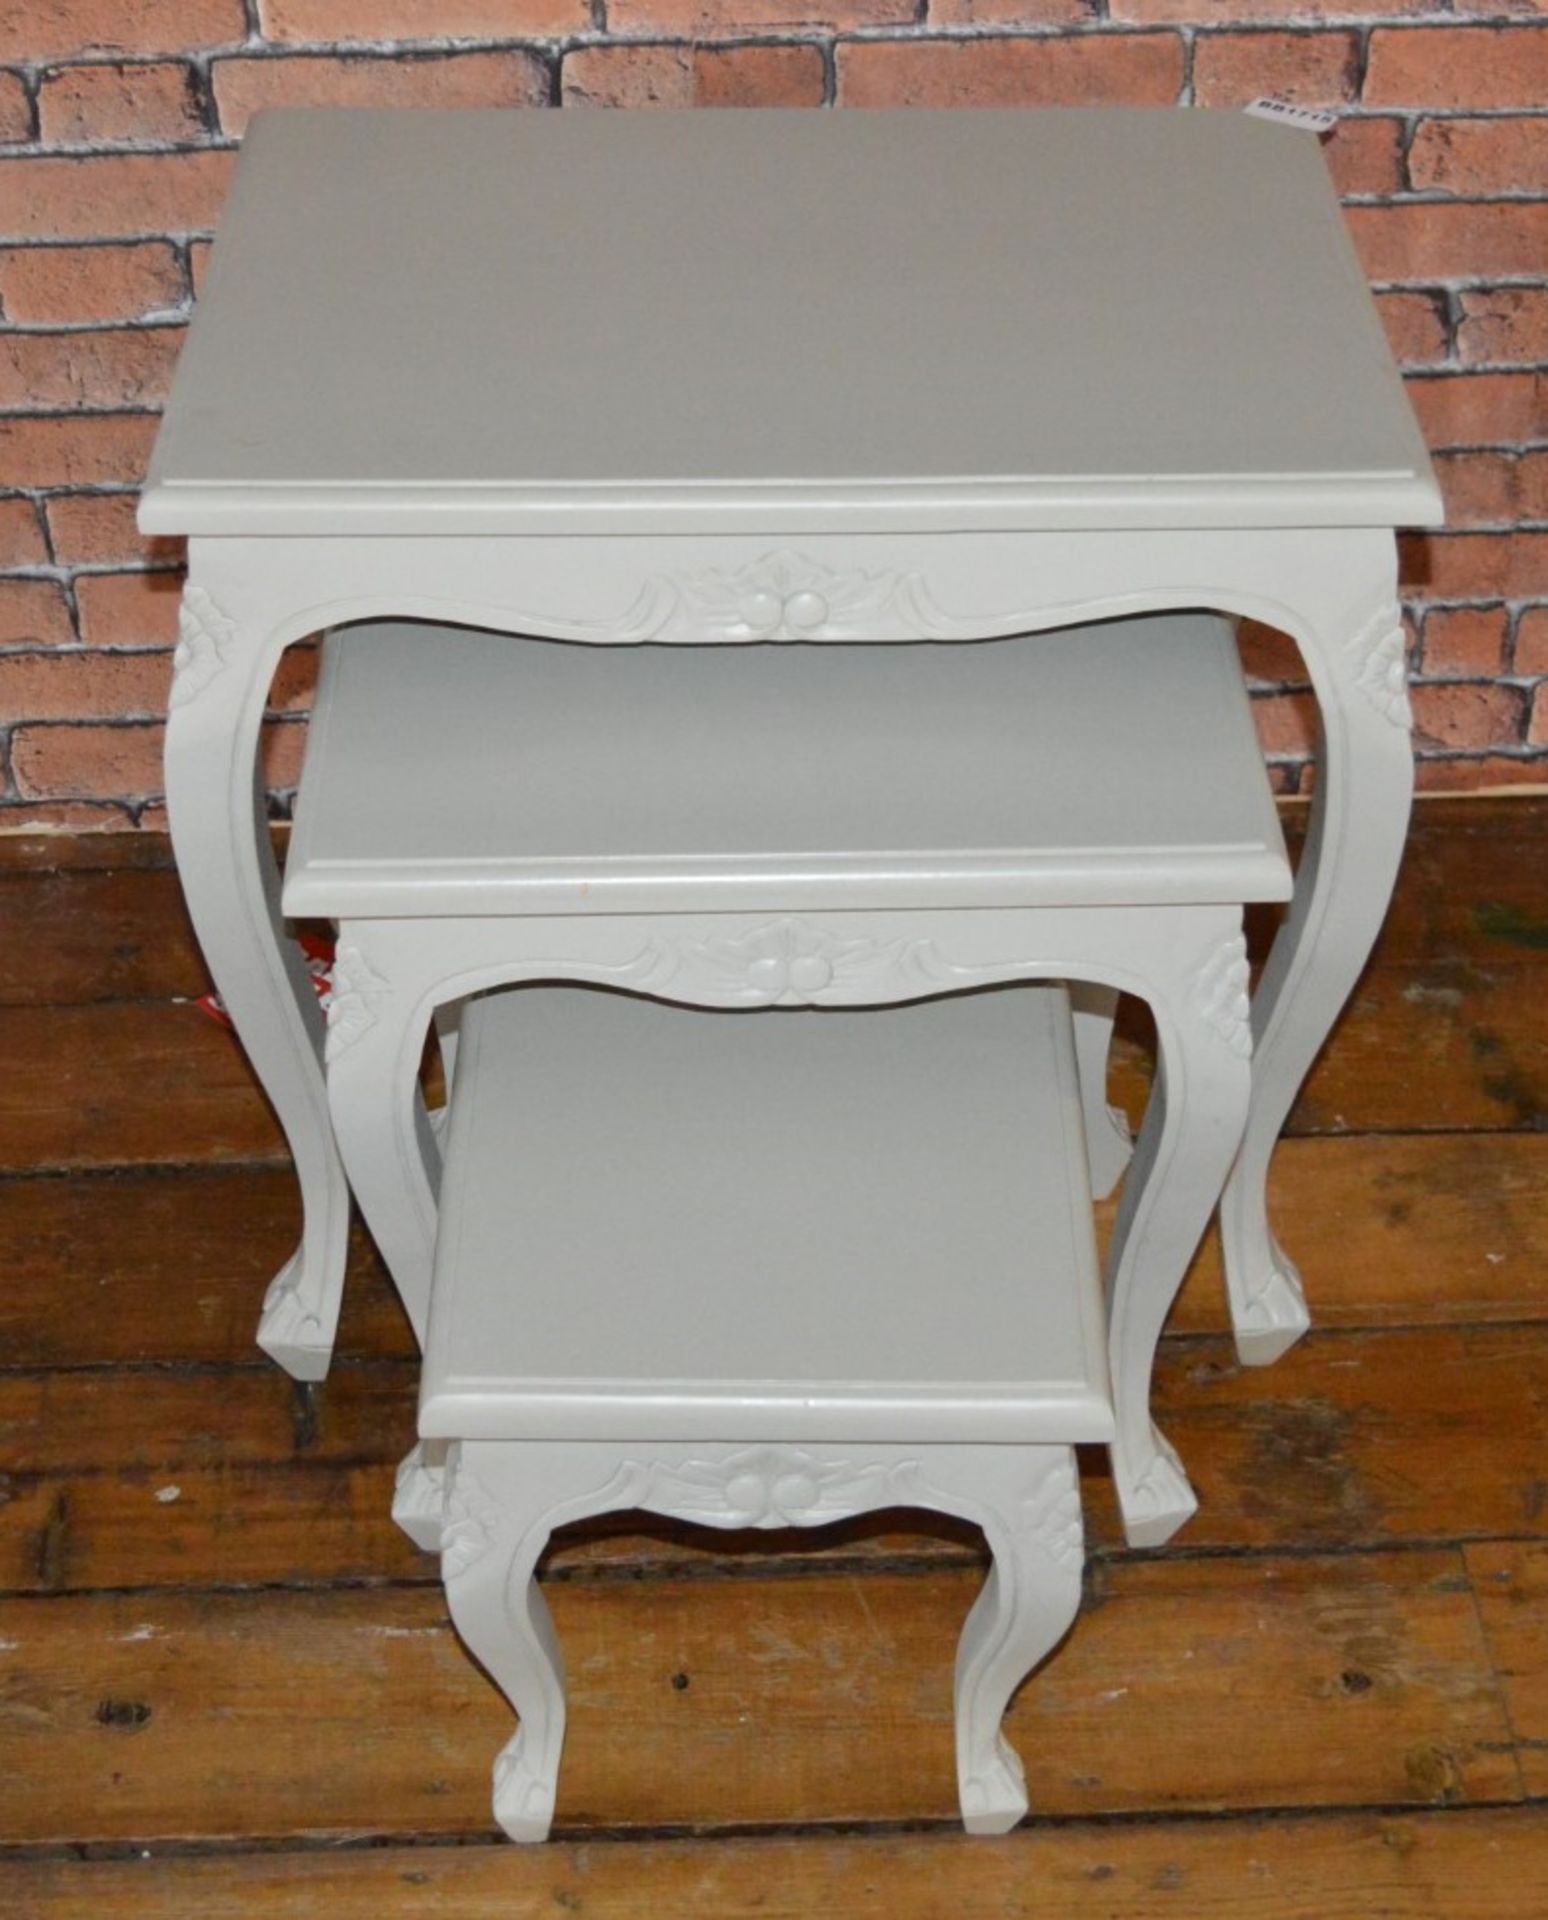 1 x Nest of Three Tables Finished in a Contemporary Grey - H61 x W59 x D45 cms - Ref BB1715 2F - - Image 3 of 6